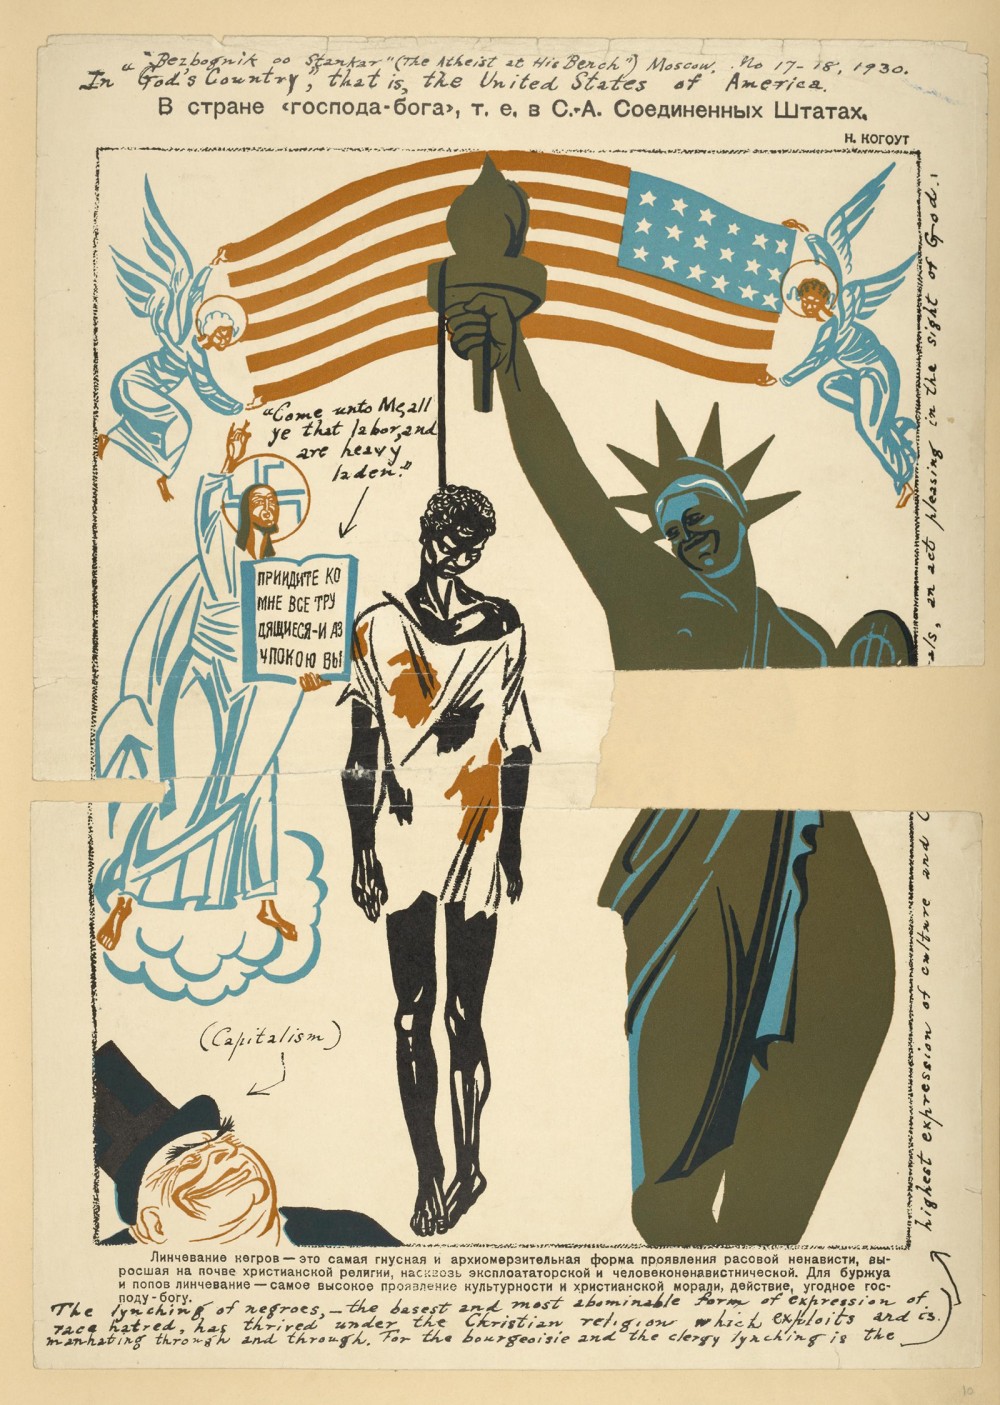 The Soviet Union took advantage of the very real racial tensions in the U.S. to create anti-American propaganda. This 1930 Soviet poster shows a black American being lynched from the Statue of Liberty, while the text below asserts the links between racism and Christianity. 1930 issue of Bezbozhnik. Wikimedia, http://commons.wikimedia.org/wiki/File:Bezbozhnik_u_stanka_US_1930.jpg. 